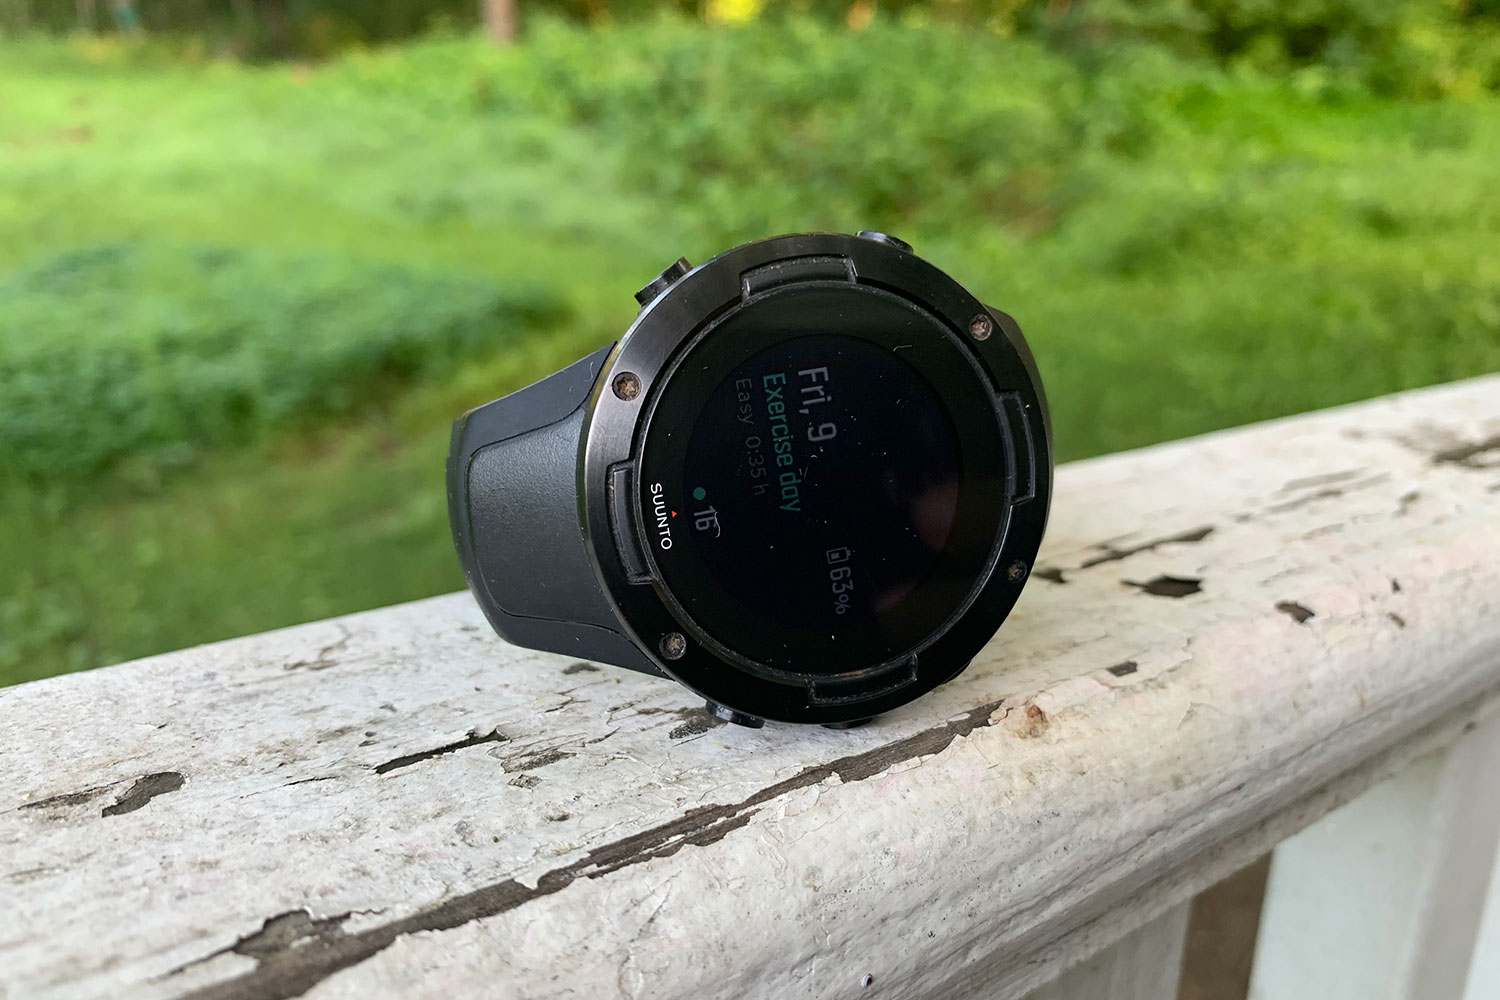 Suunto 5 peak Review - A fitness professionals look at a fitness